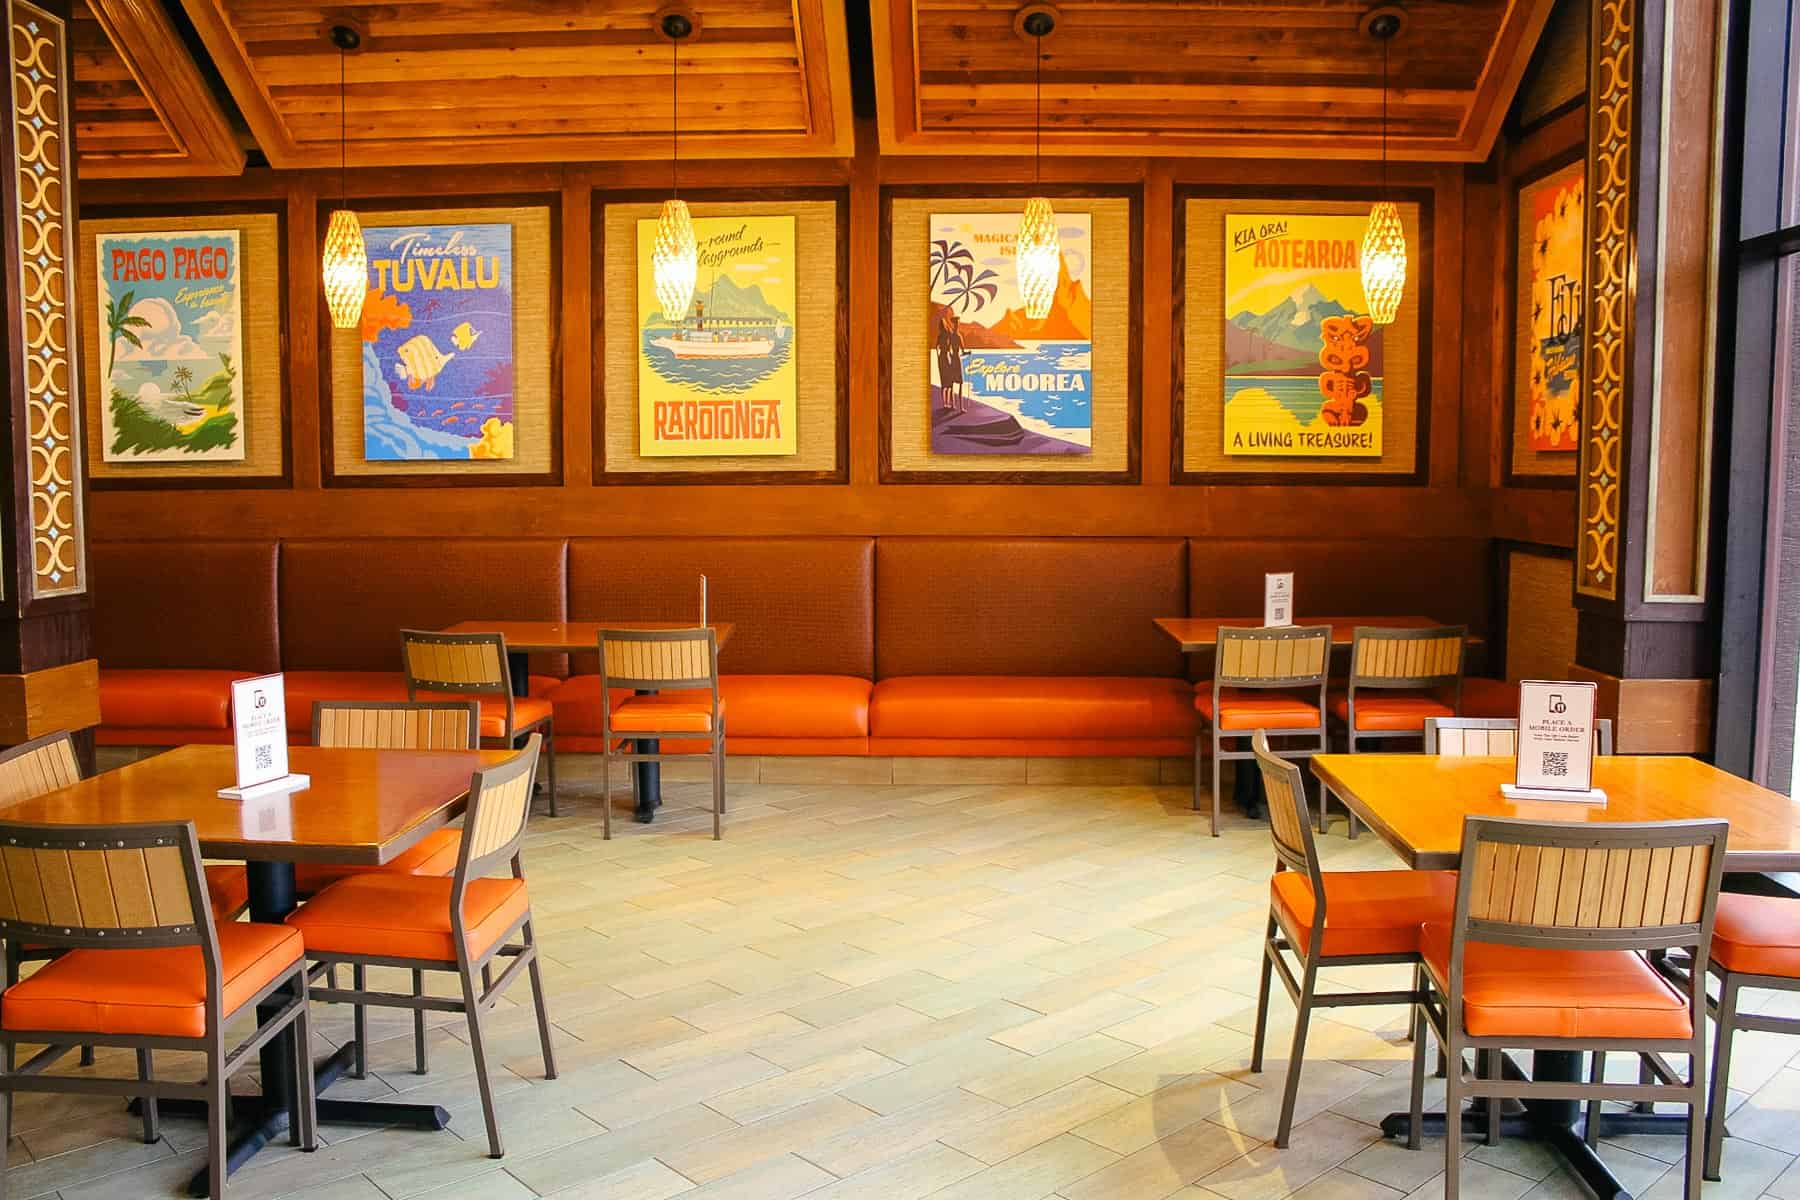 Why We Love Mobile Ordering From Capt. Cook’s at Disney’s Polynesian